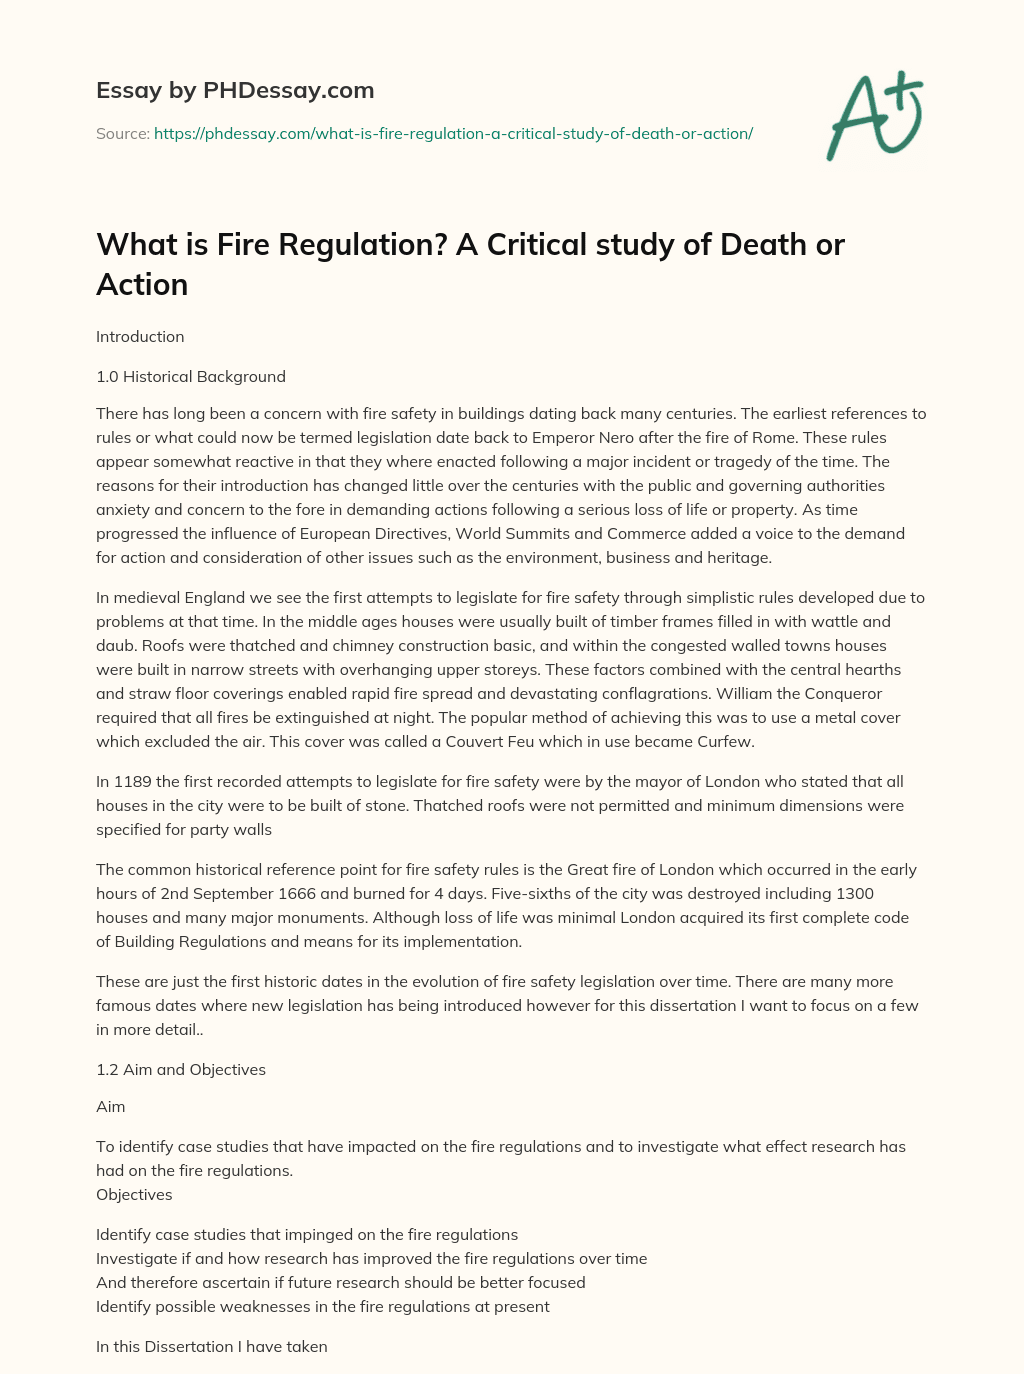 What is Fire Regulation? A Critical study of Death or Action essay